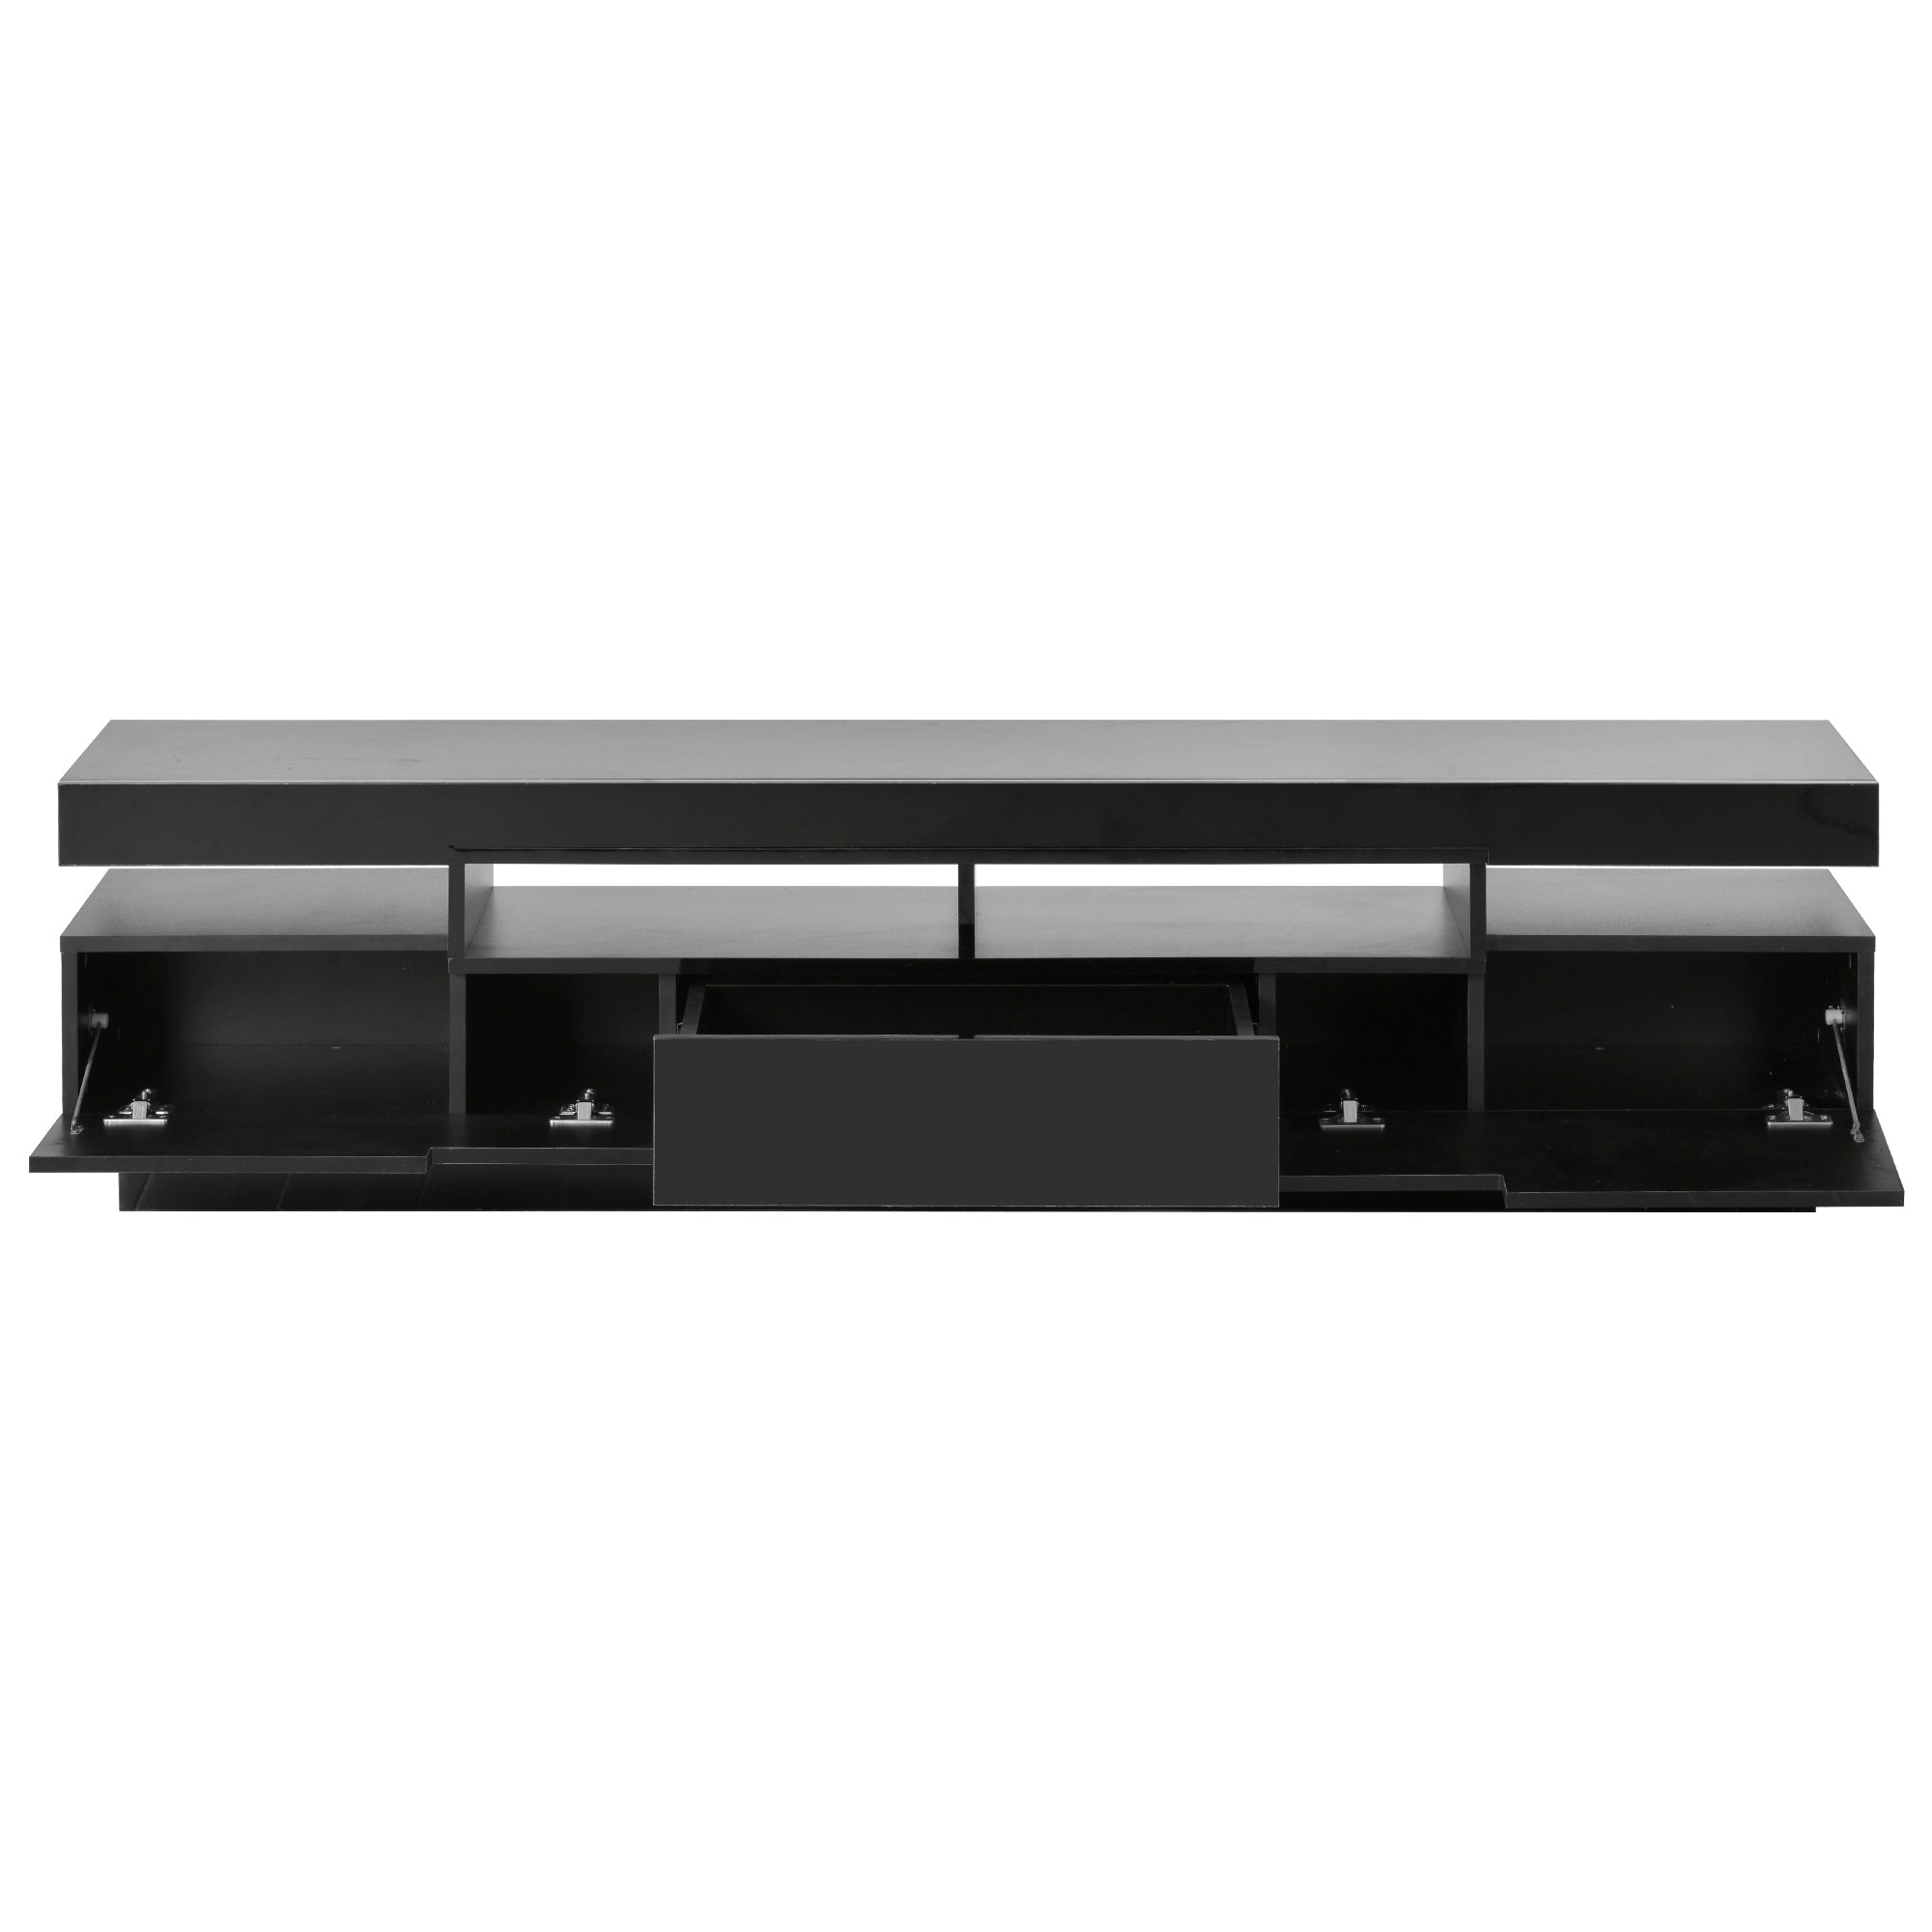 67" Black High Gloss Modern TV Stand With Storage and LED Light, Fits TV up to 75"